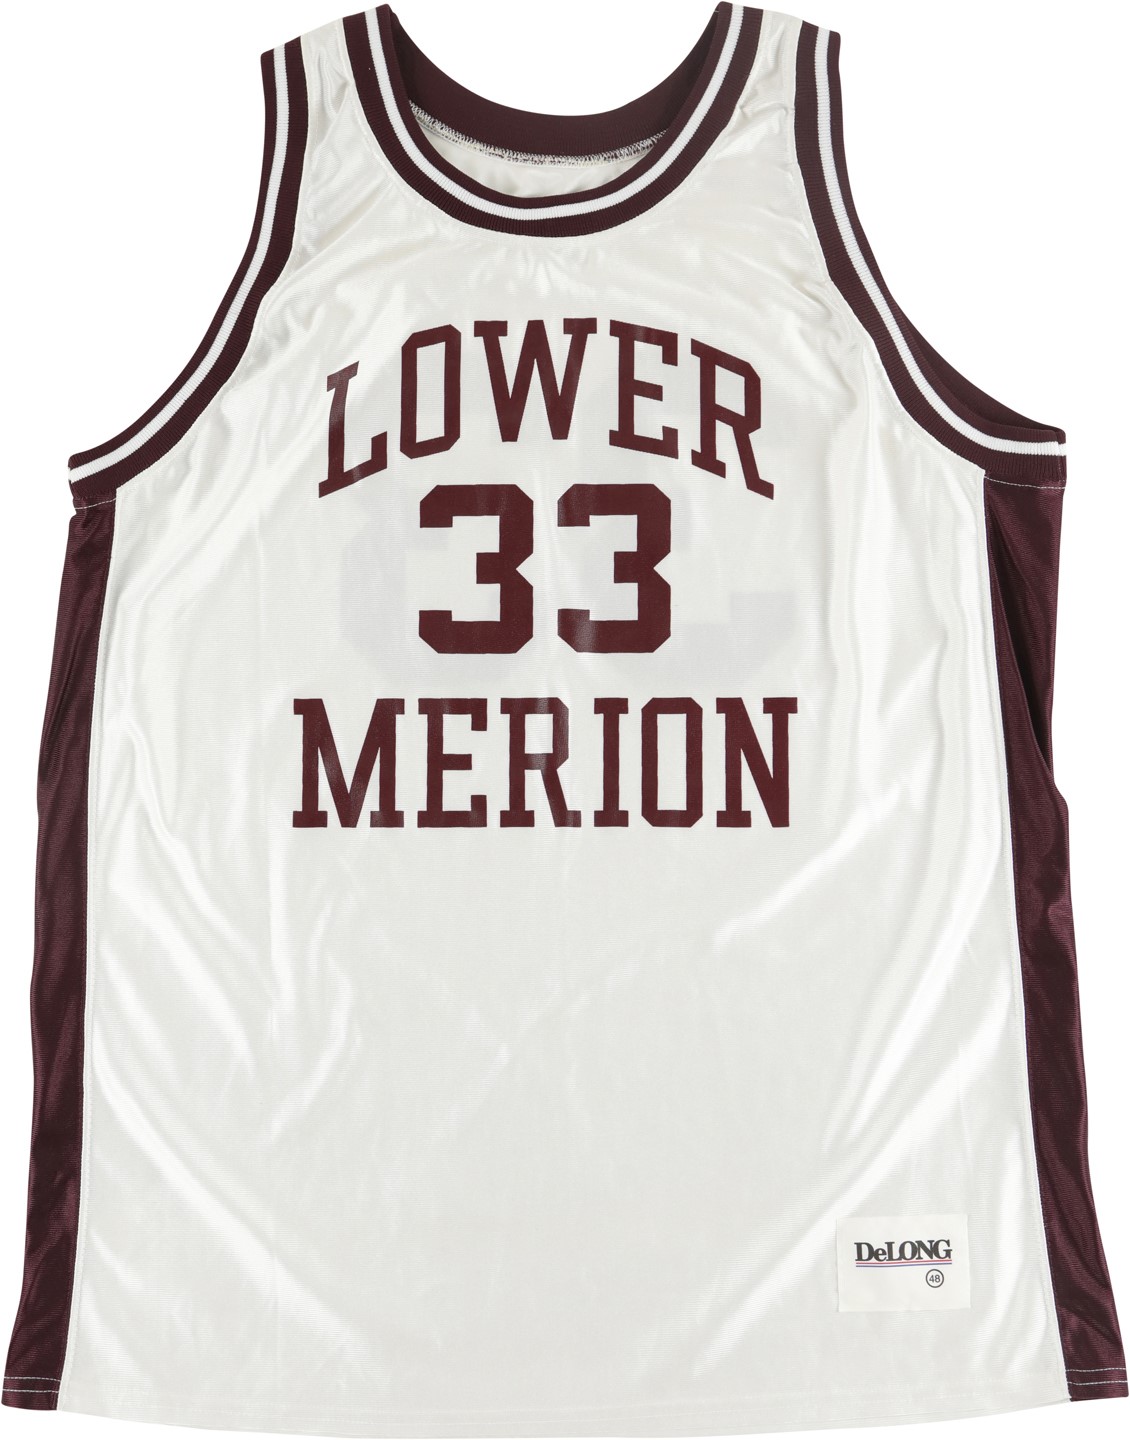 - Kobe Bryant Lower Merion High School Game Worn Jersey - Sources from Kobe's Agent & Former NBA Player (MEARS A10)